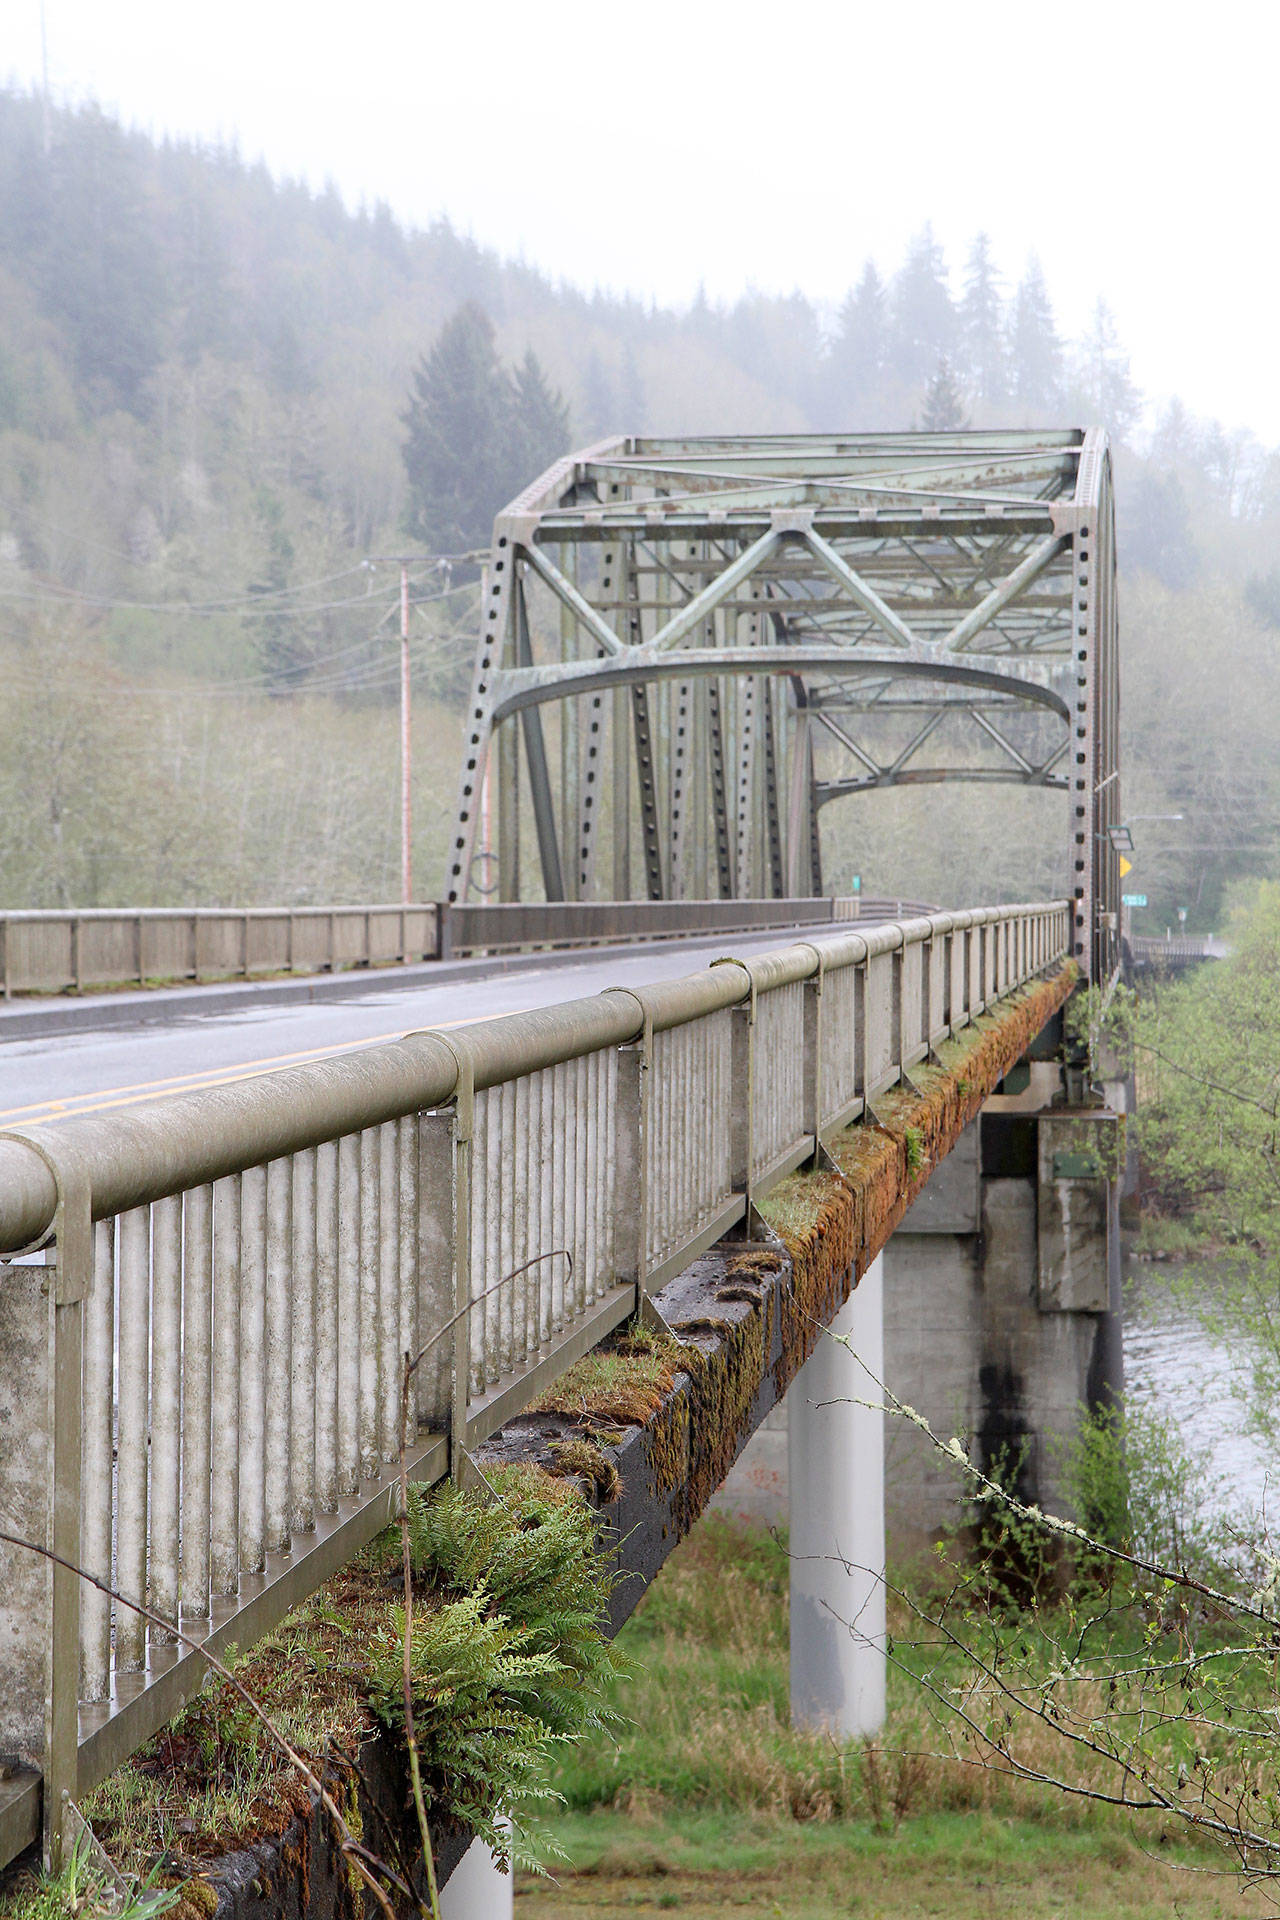 Beginning next week, state Department of Transportation personnel will lower the speed limit along state Route 107 in preparation for painting the Chehalis River Bridge south of Montesano. The WSDOT also will replace the wooden guard rails south of the bridge. Michael Lang | Grays Harbor News Group